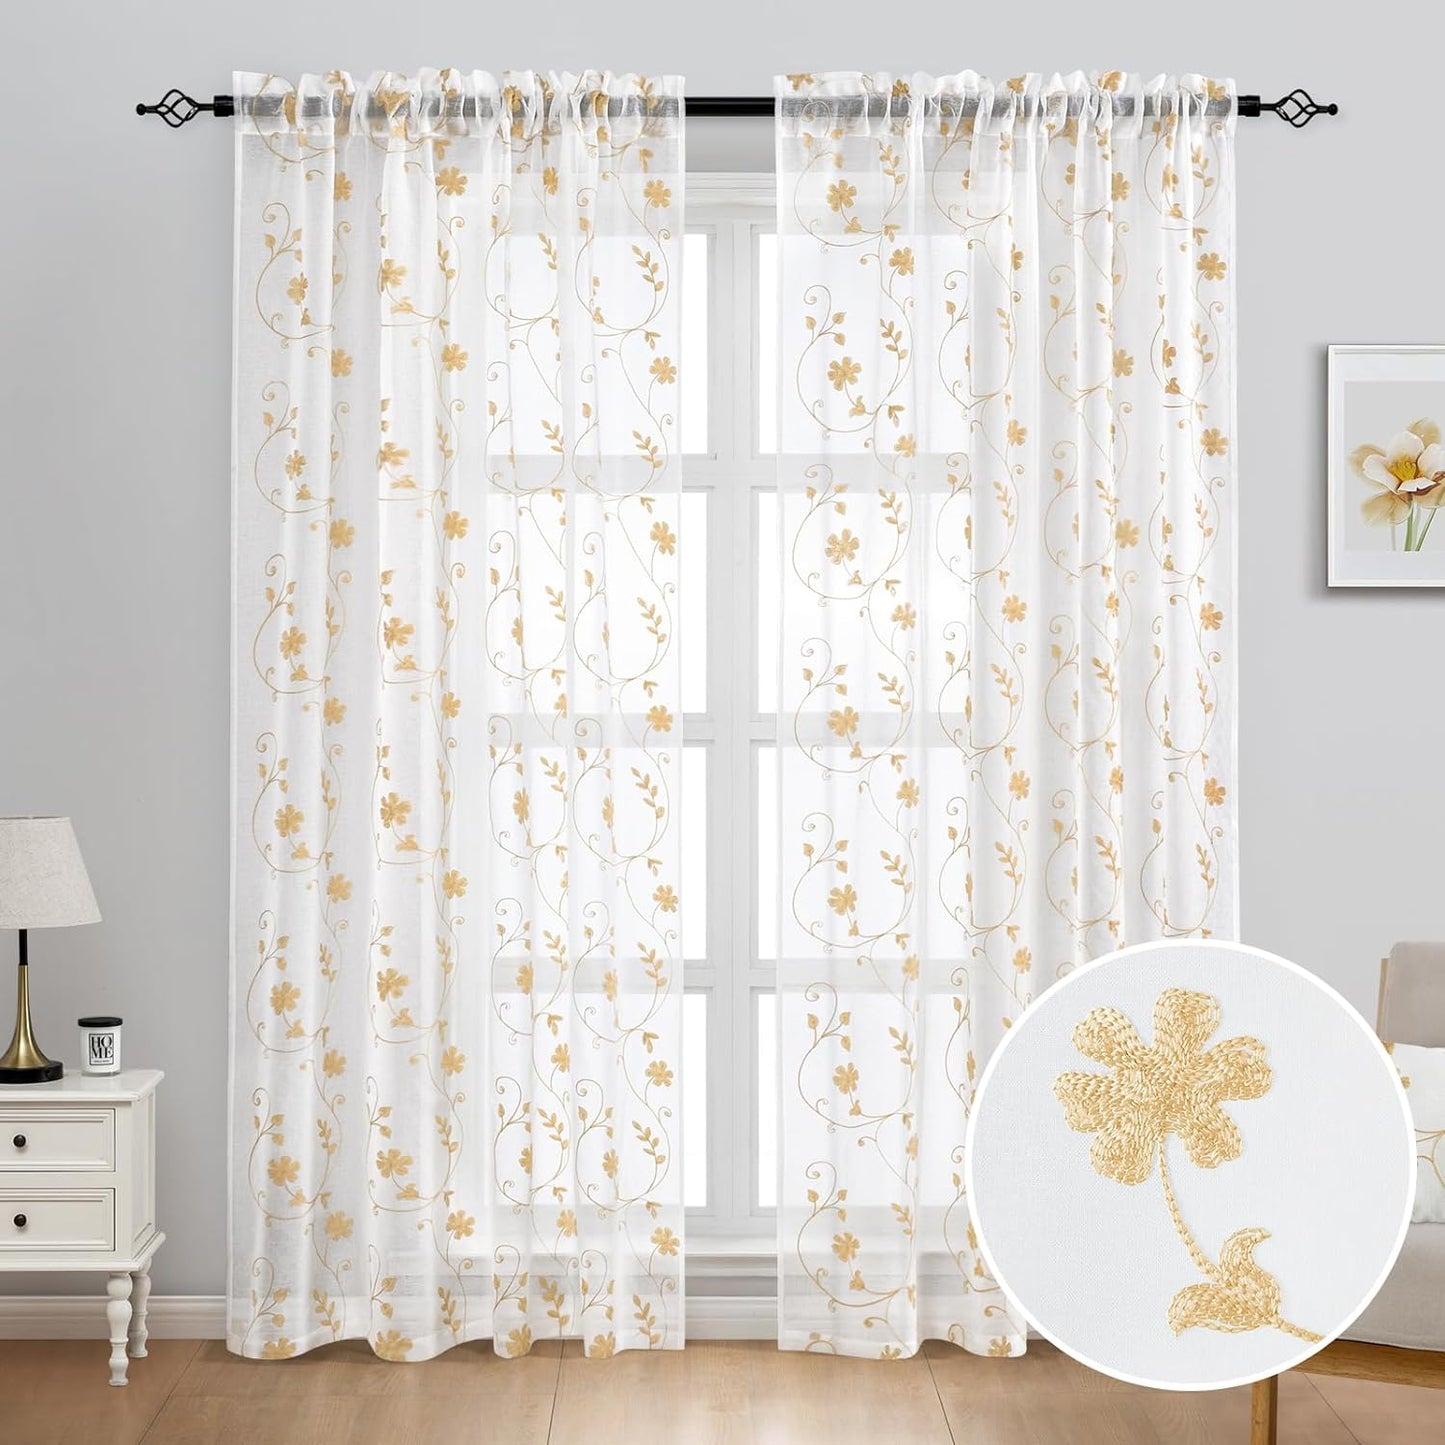 HOMEIDEAS Sage Green Sheer Curtains 52 X 63 Inches Length 2 Panels Embroidered Leaf Pattern Pocket Faux Linen Floral Semi Sheer Voile Window Curtains/Drapes for Bedroom Living Room  HOMEIDEAS White  Yellow W52" X L96" 